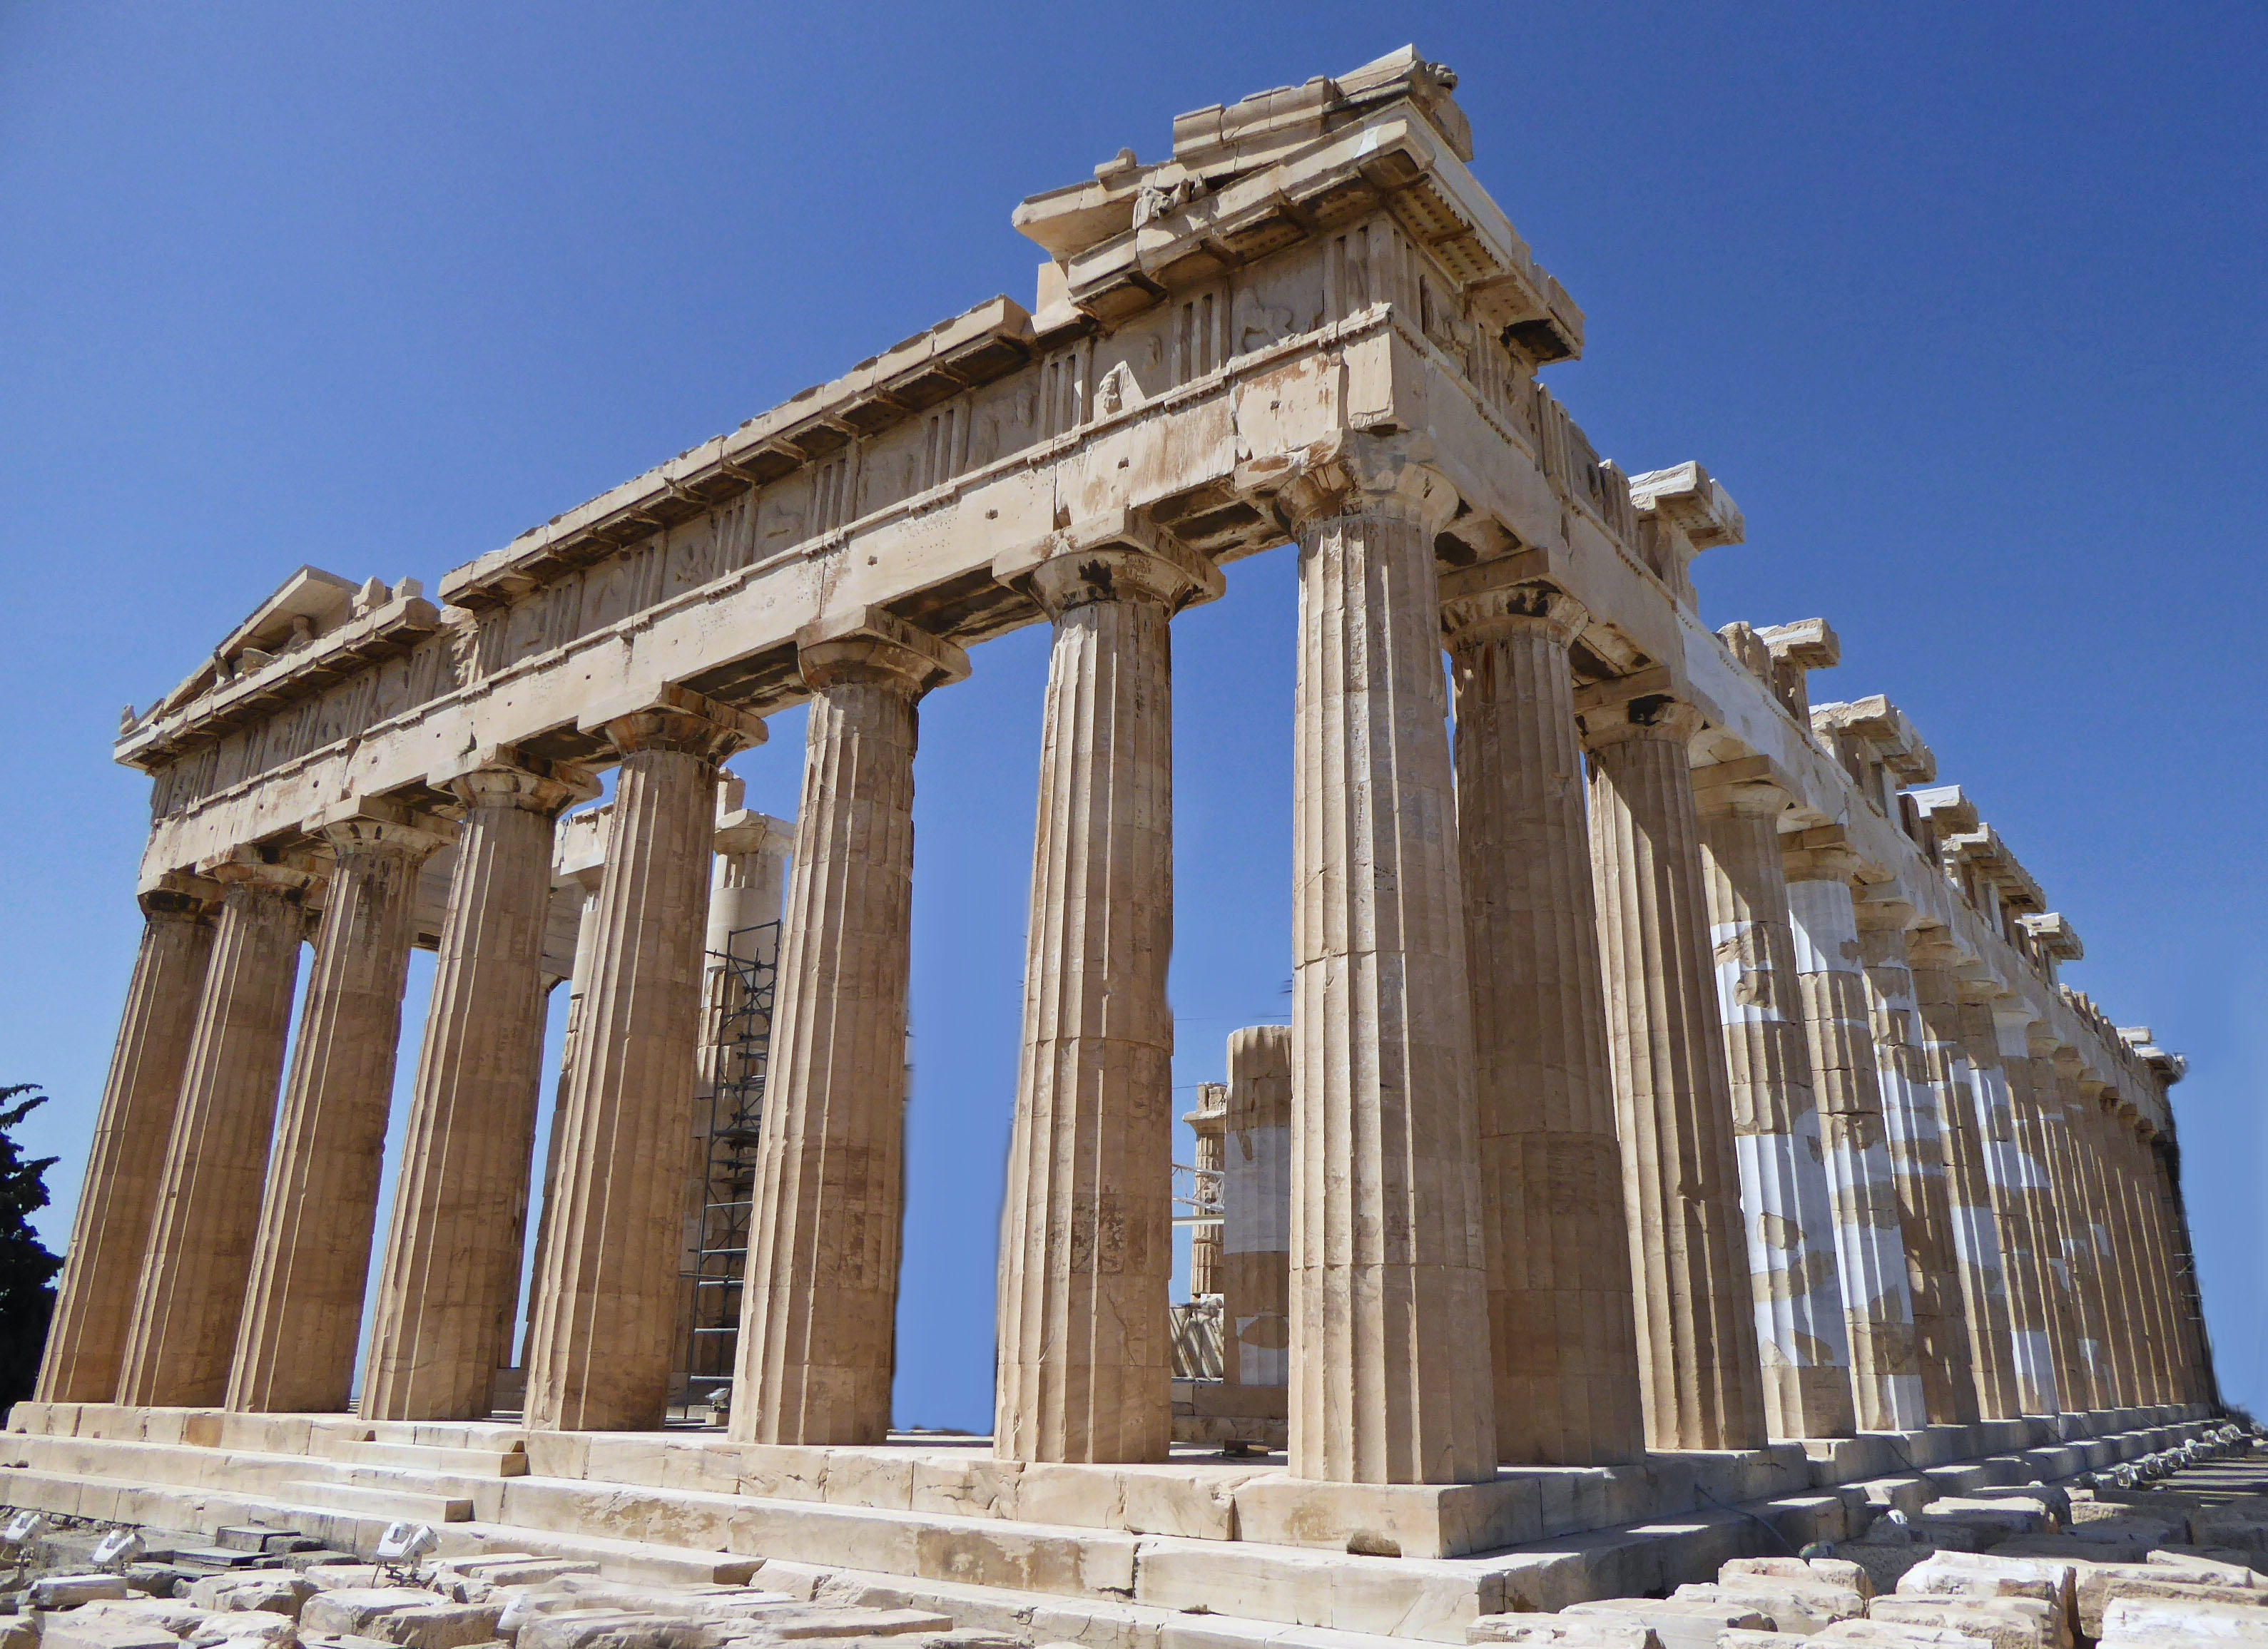 The Parthenon is a former temple dedicated to the goddess Athena (patron of Athens)